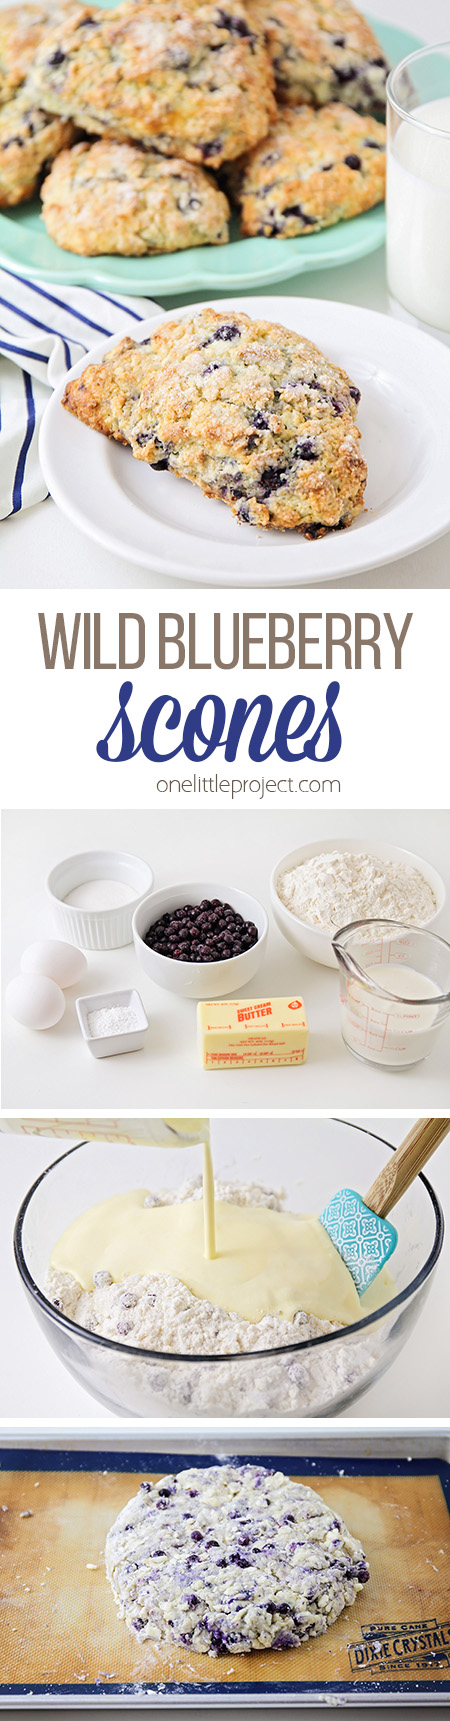 These wild blueberry scones are perfect for breakfast, brunch, or dessert! They're lightly sweetened, loaded with blueberries, and totally delicious!